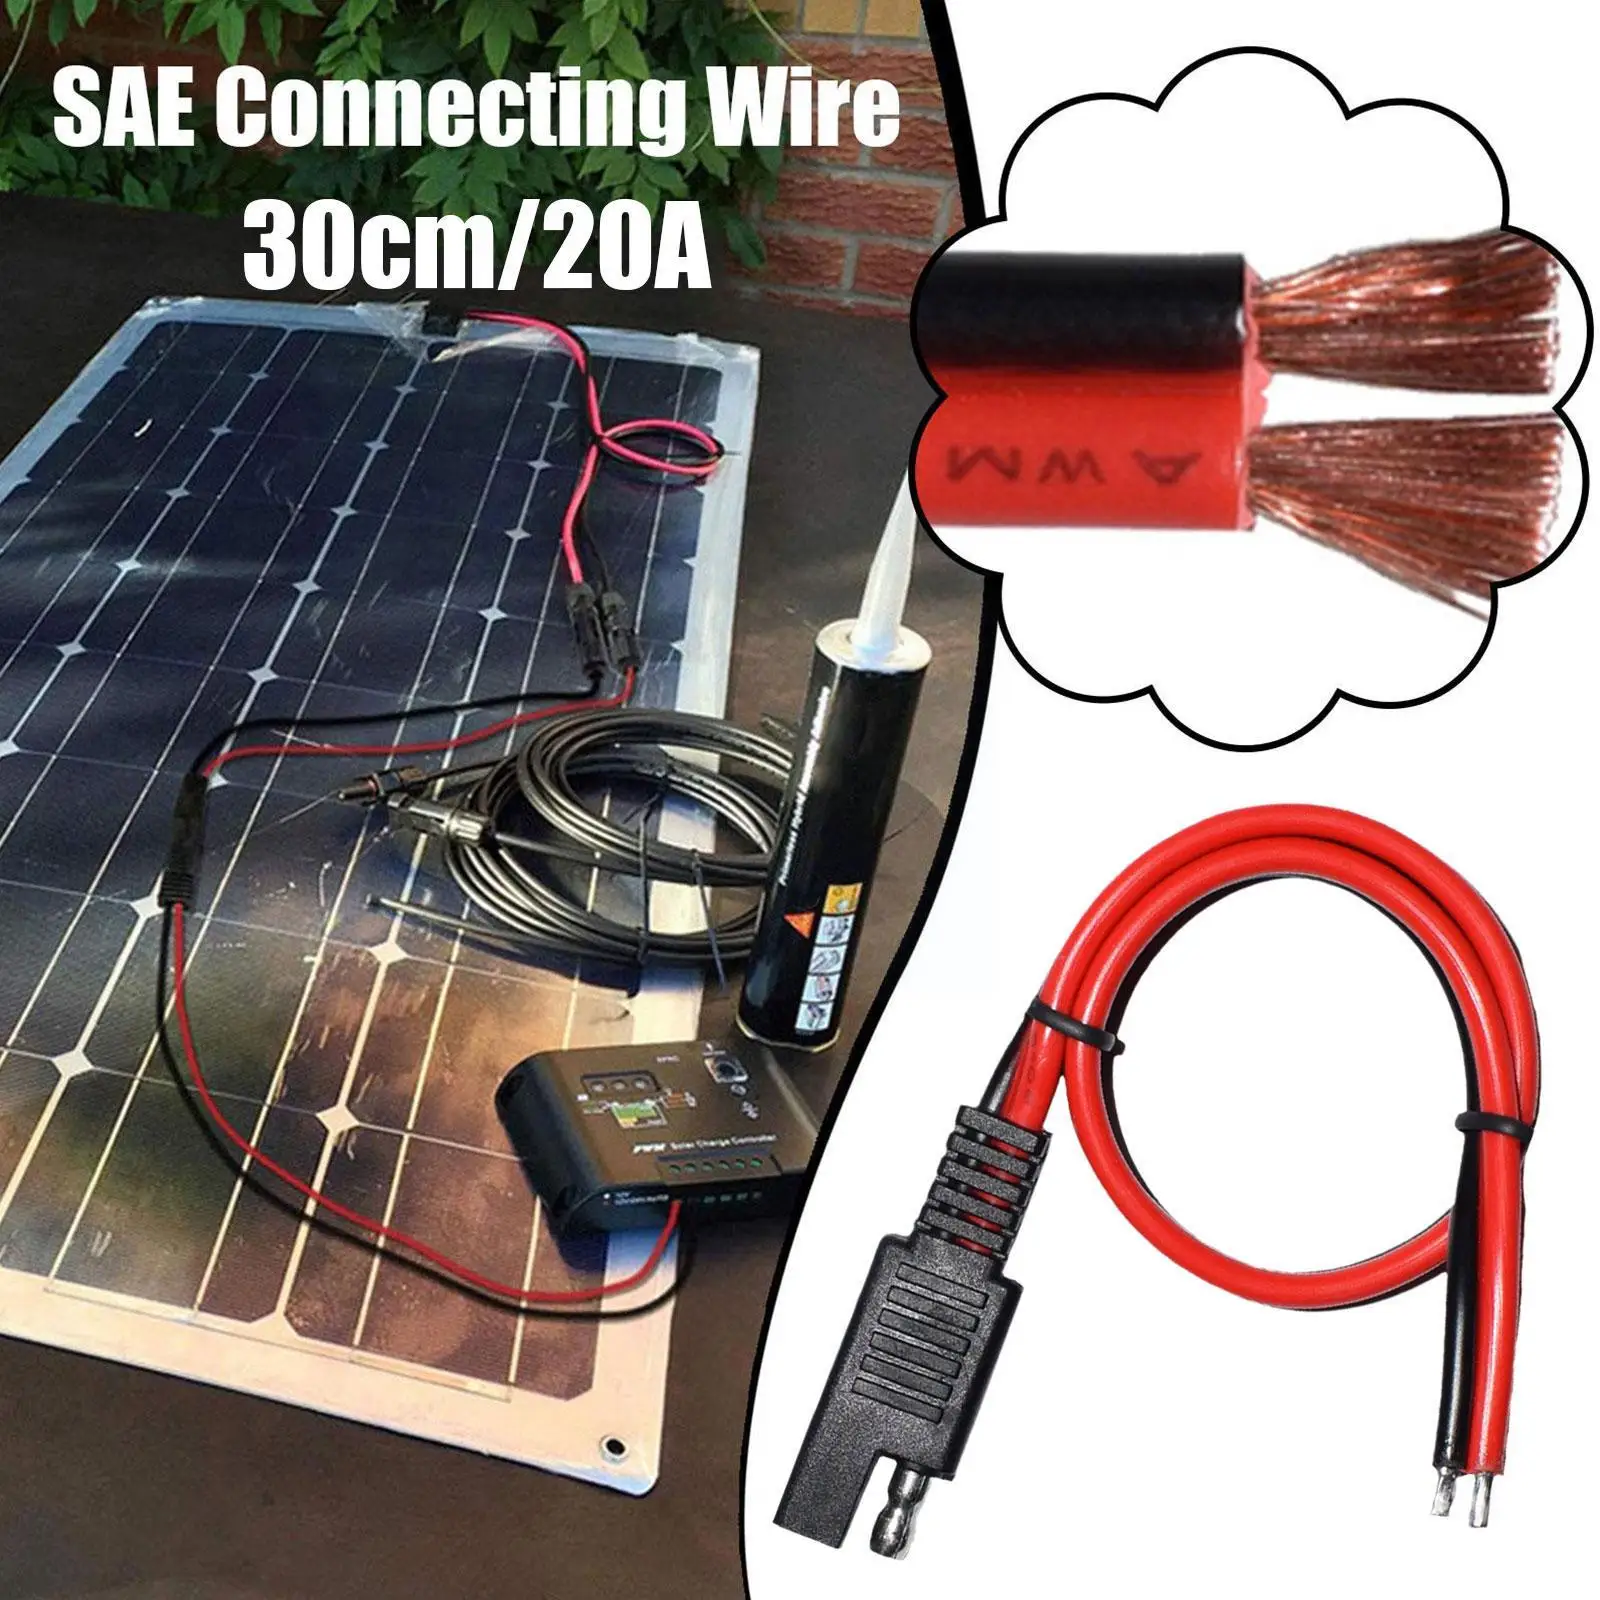 

30cm 20A SAE Connecting Wire Quick Disconnect Cable SAE Power Wire With Waterproof Cover For Solar Panel I7I9